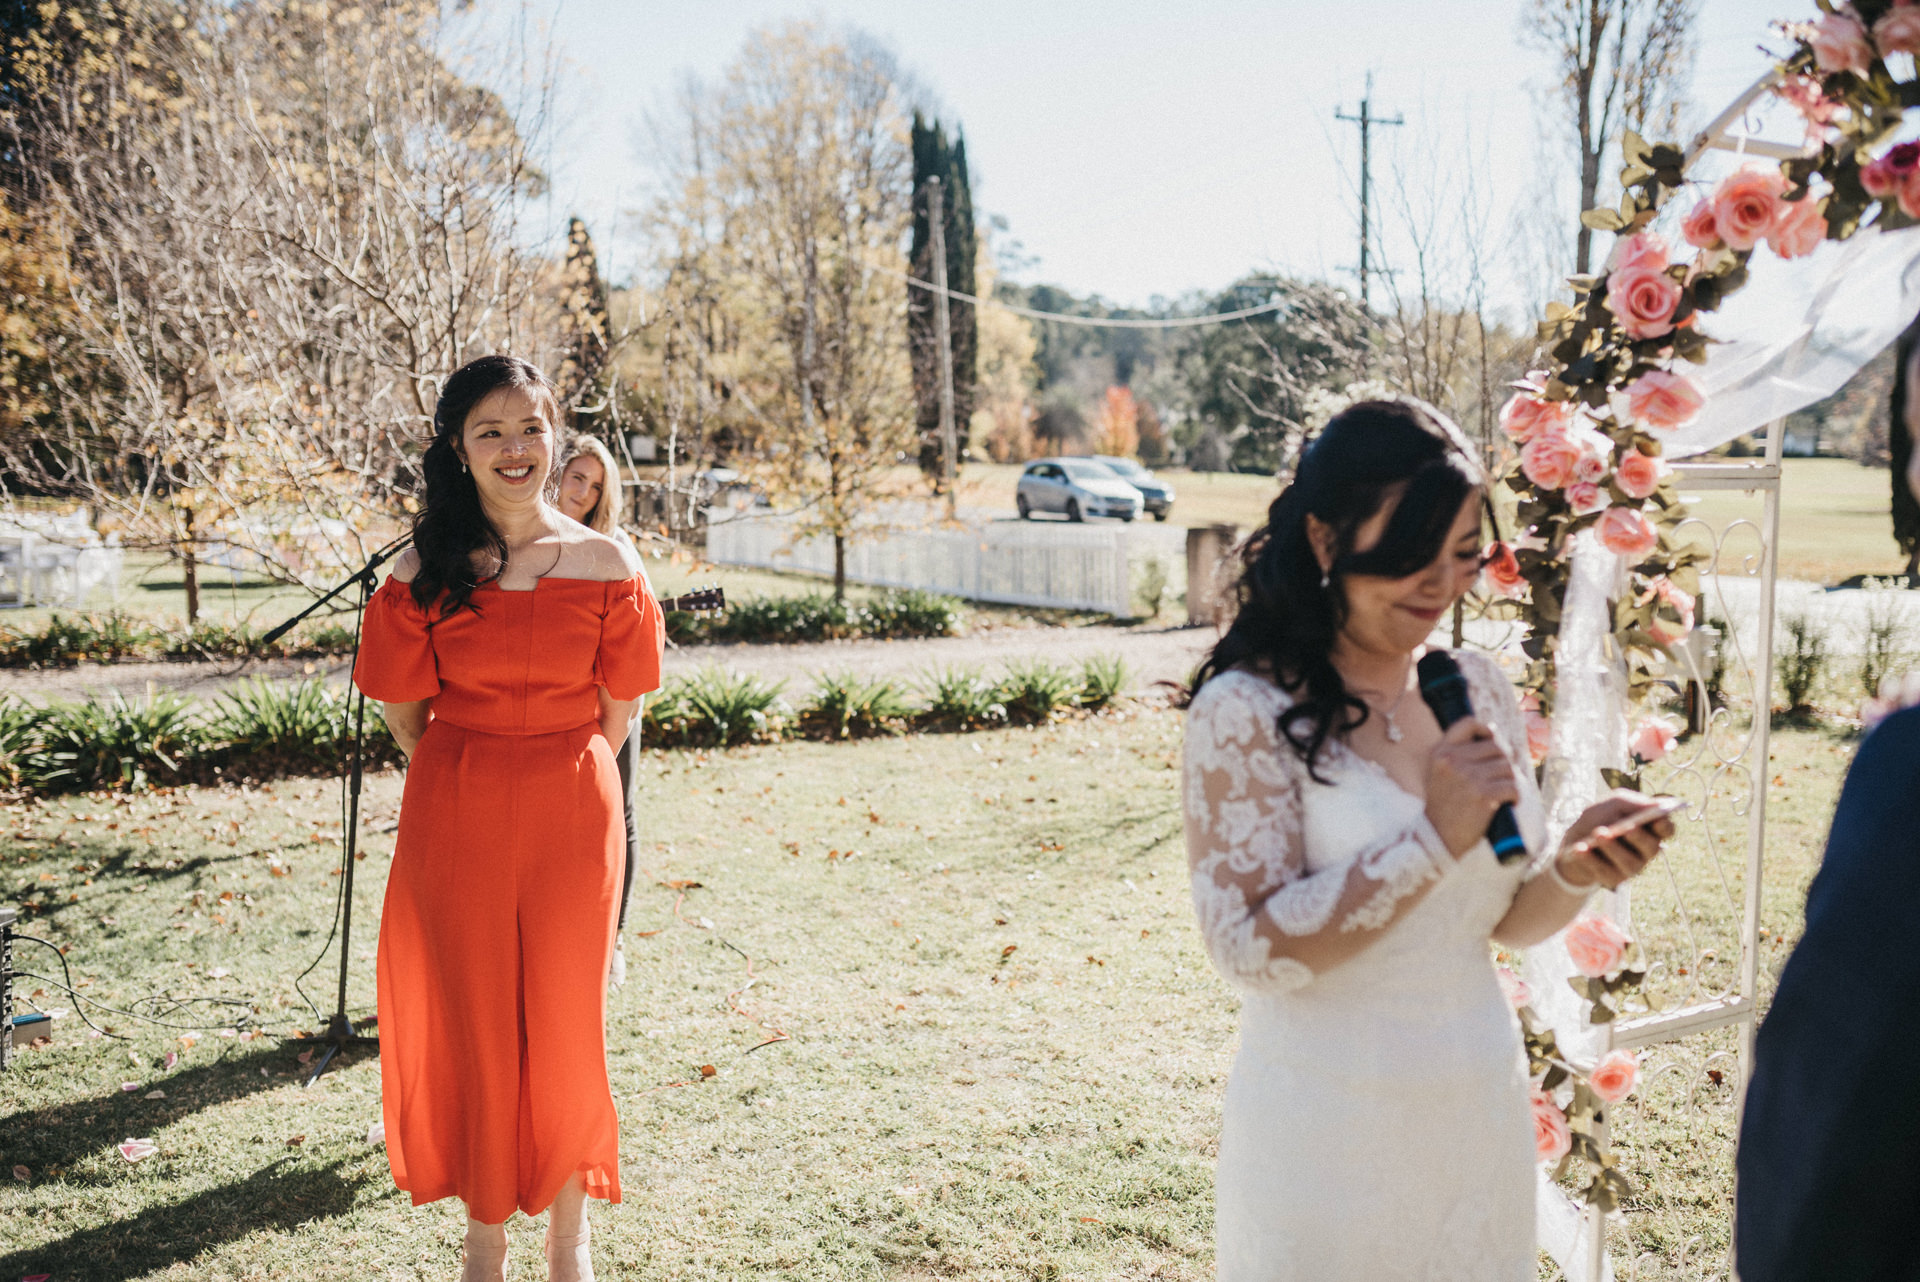 vows bowral outdoors ceremony